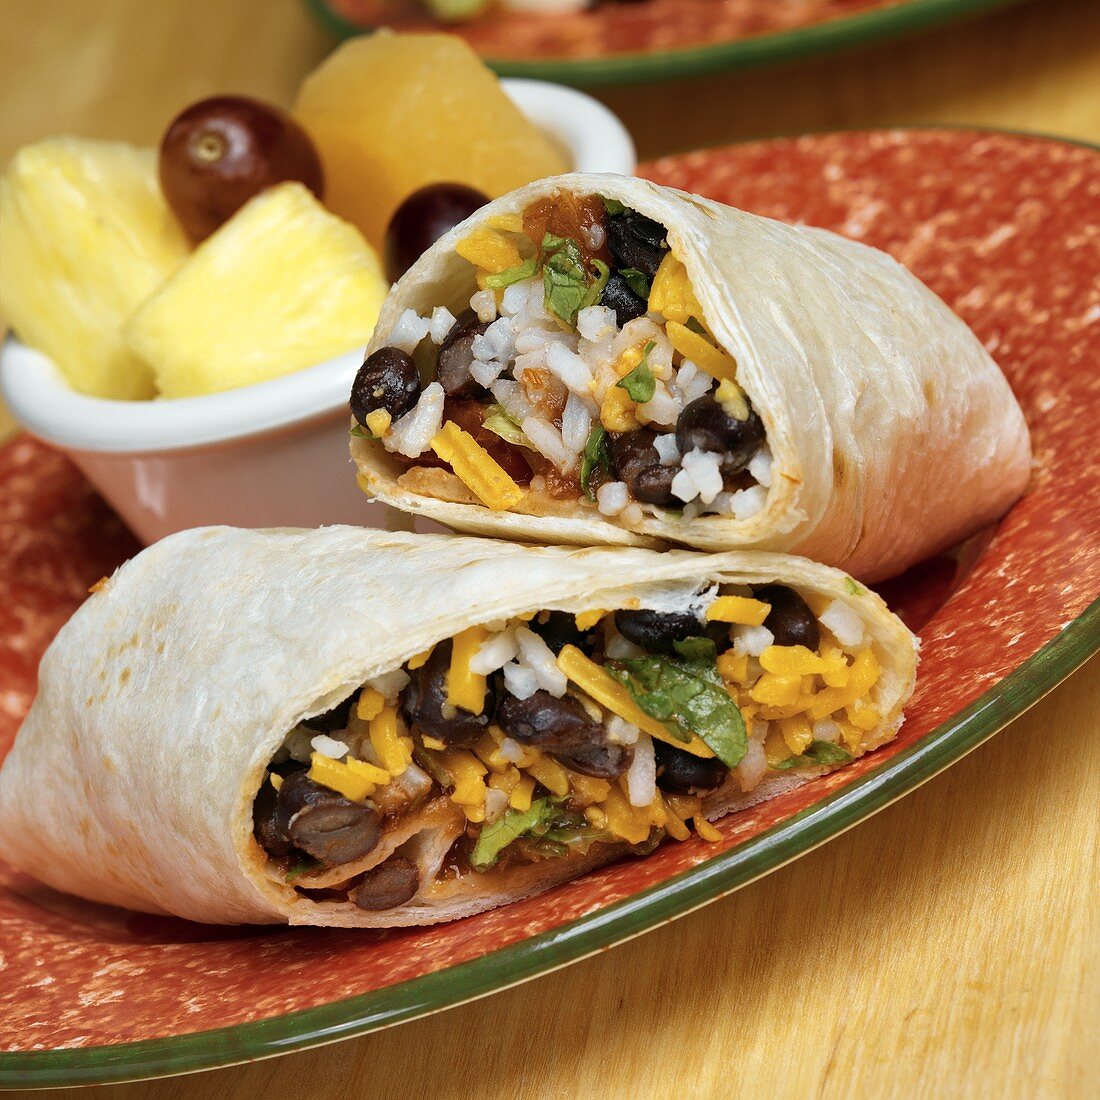 Burrito filled with cheese, black beans and rice